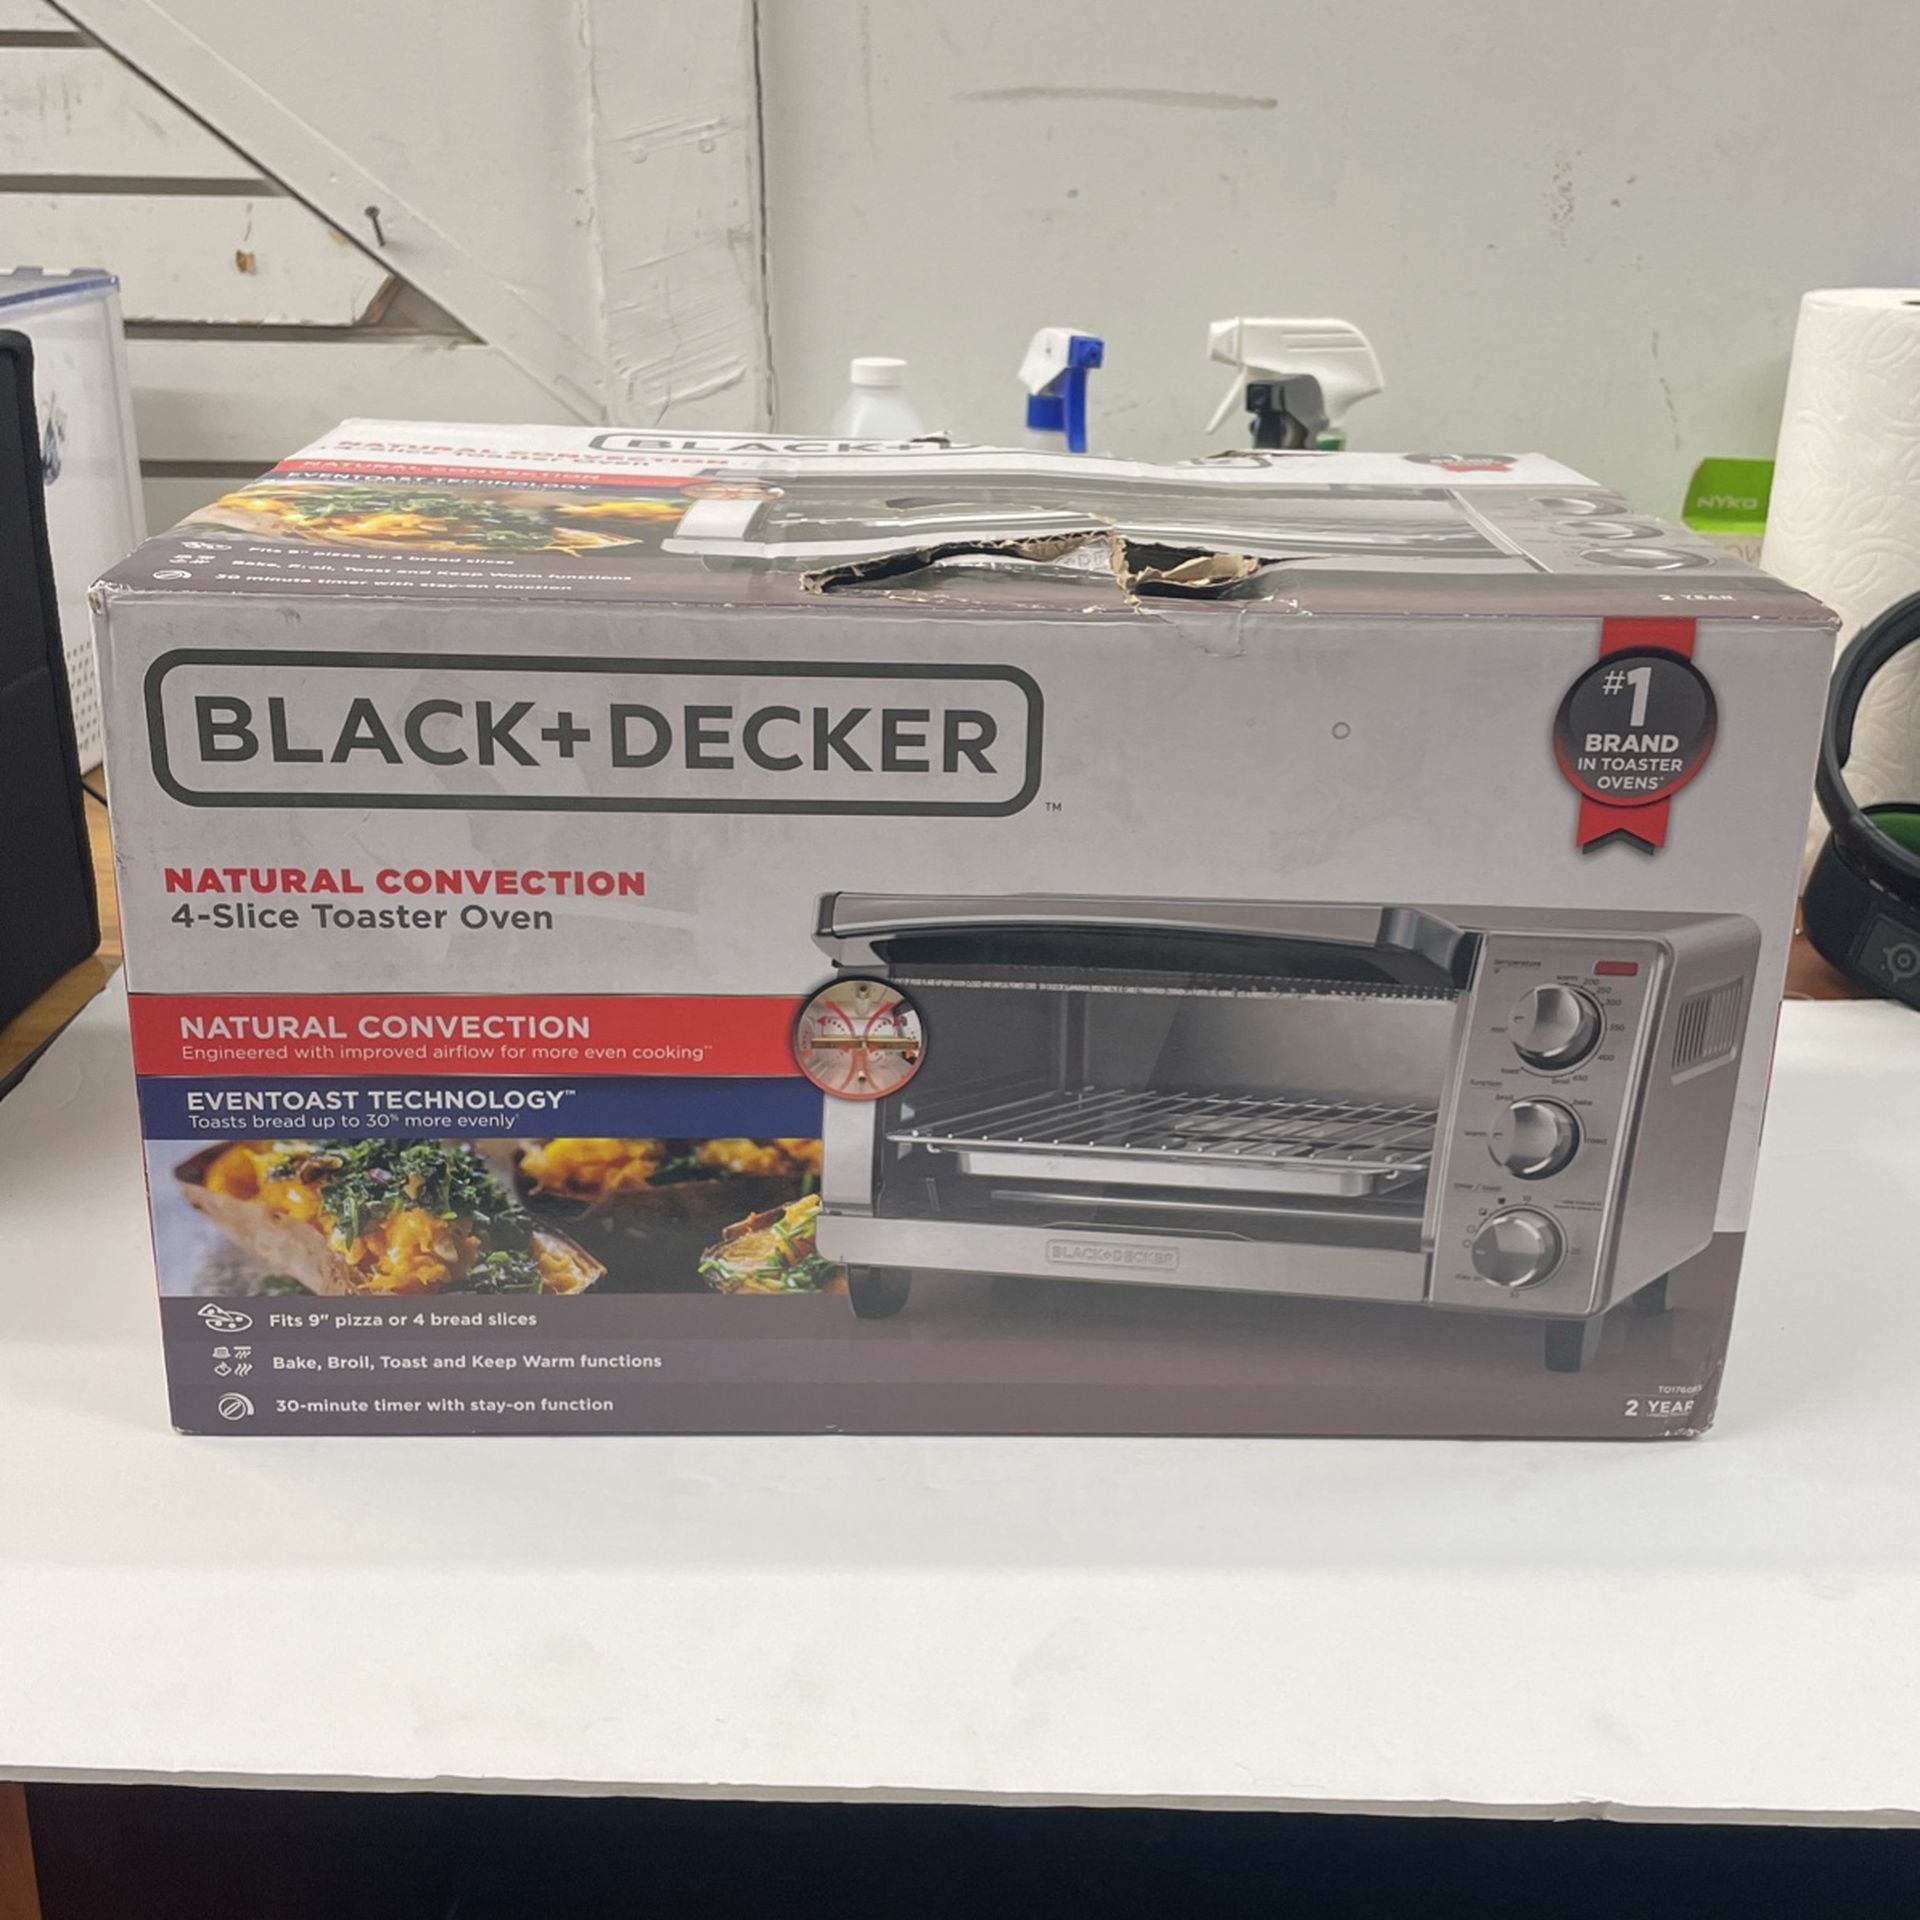 Black & Decker 4-Slice Toaster Oven with Natural Convection